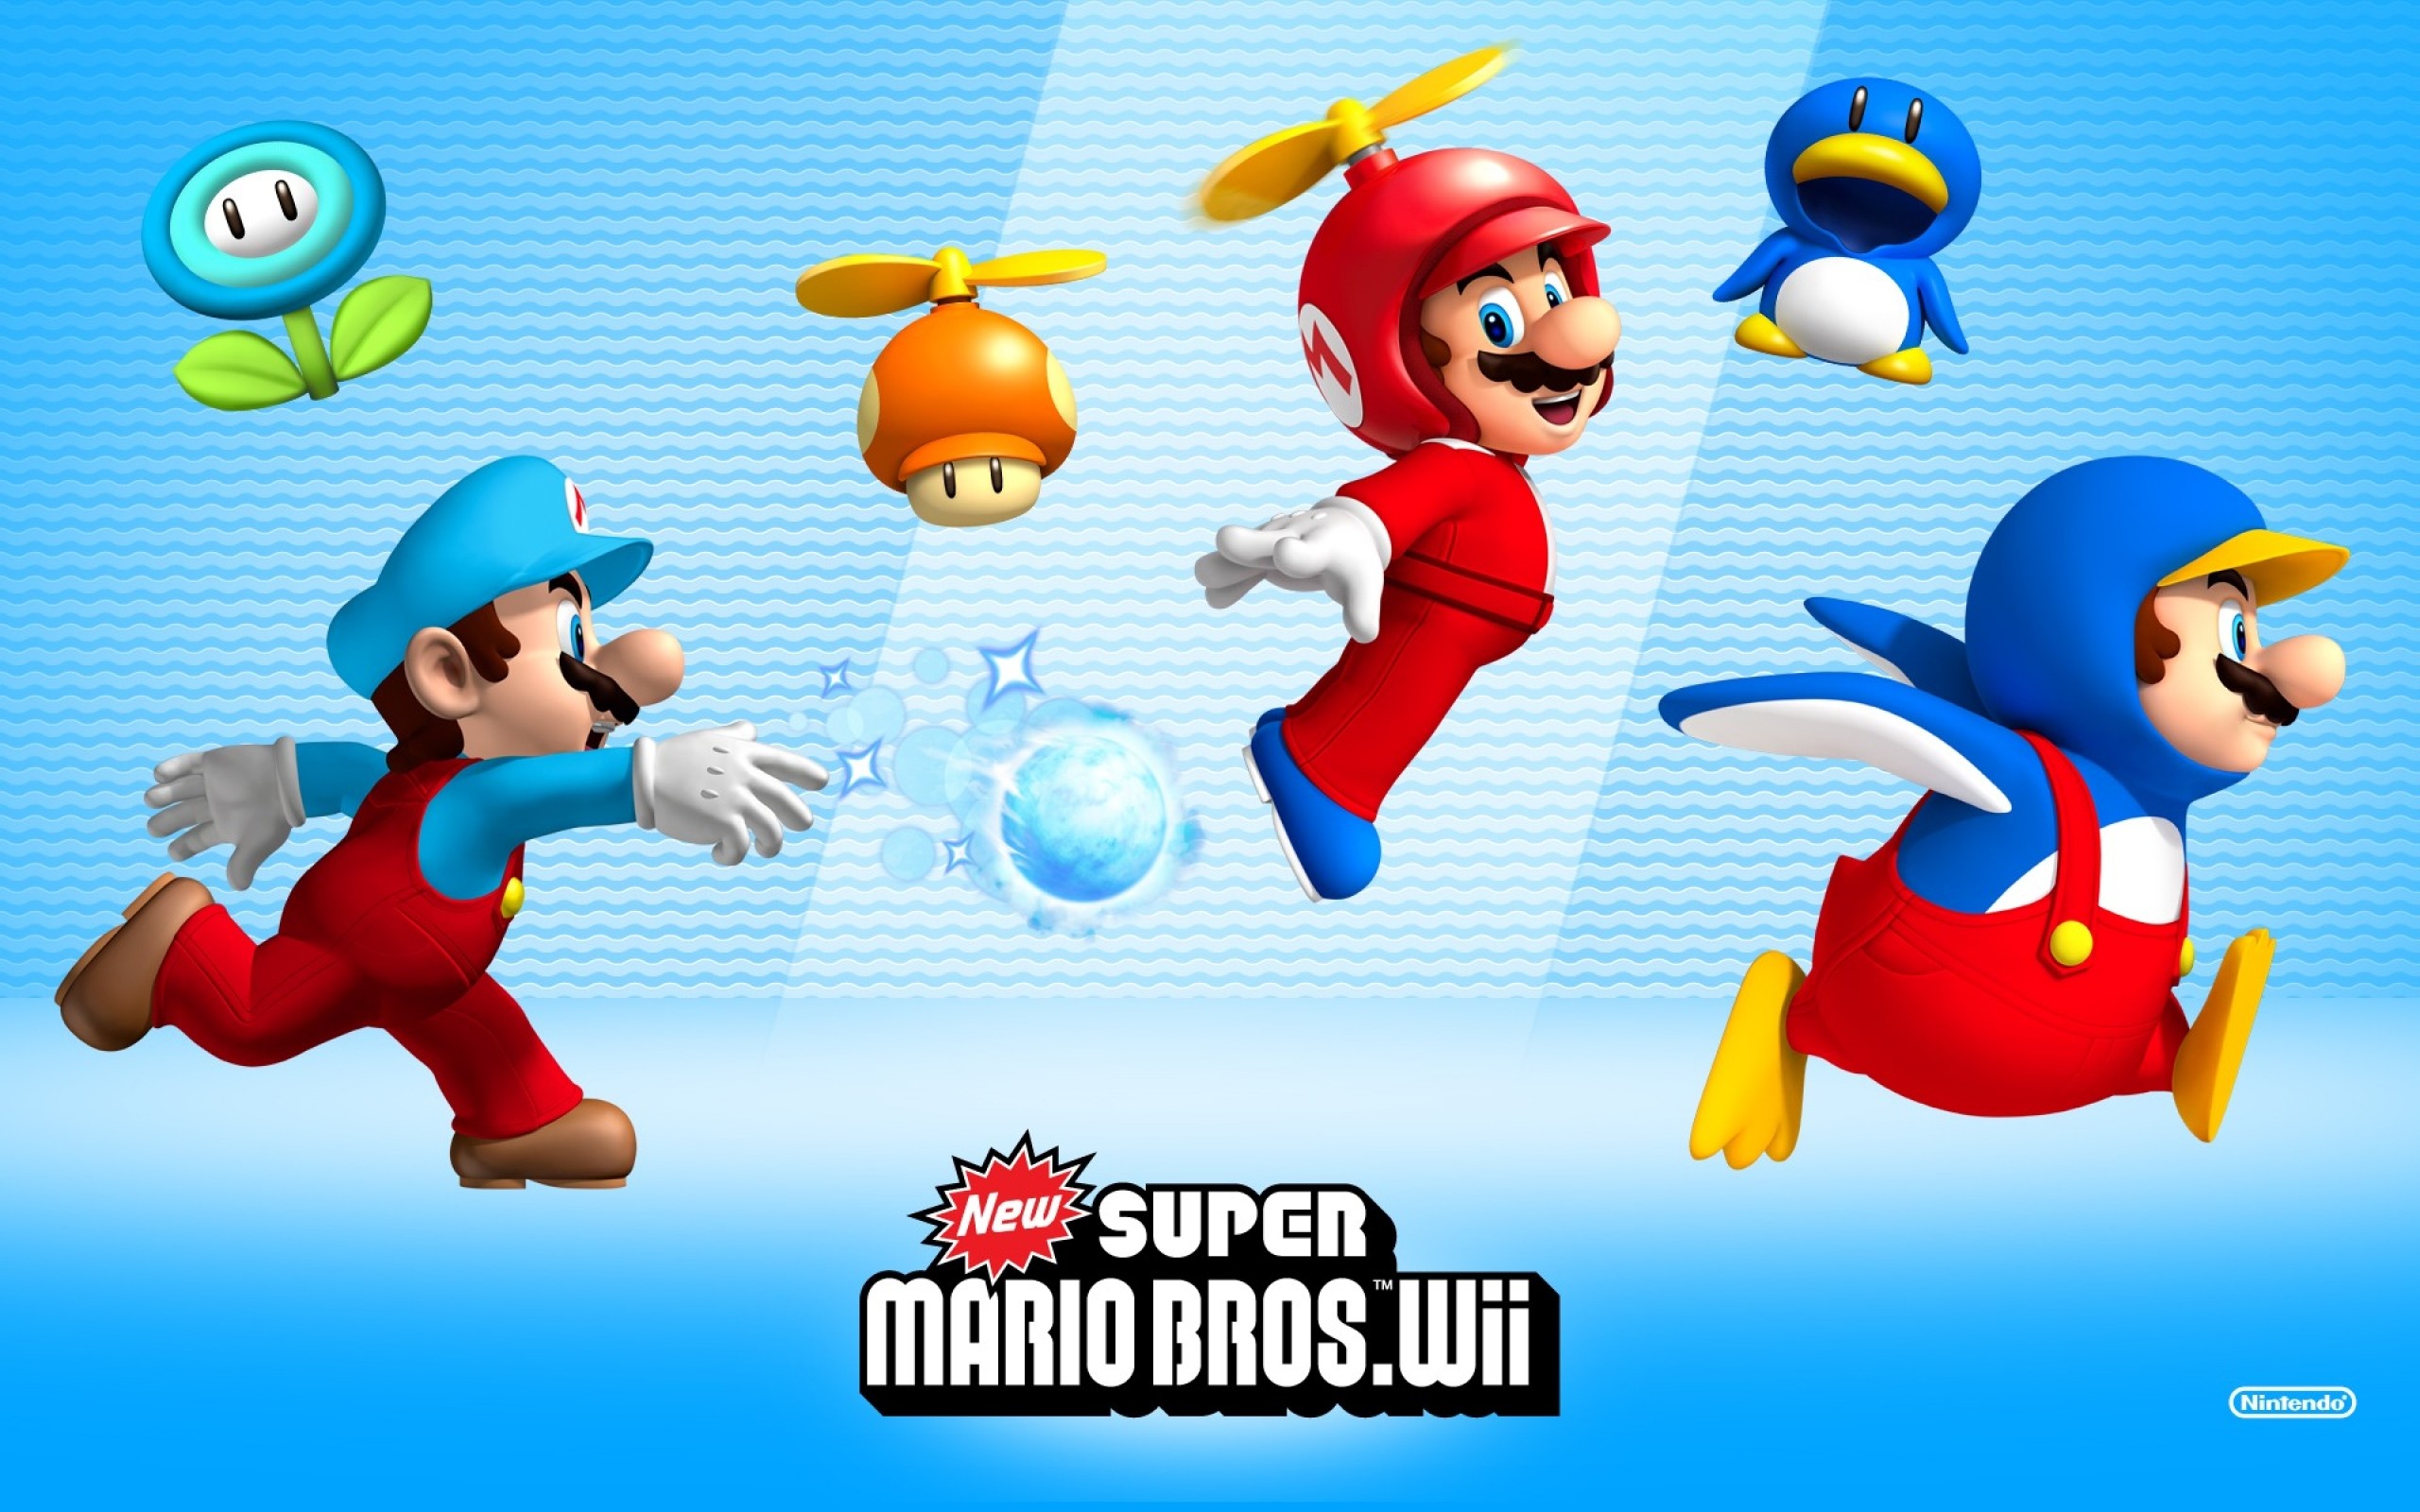 2560x1600 New Super Mario Bros. Wii wallpapers and stock photos